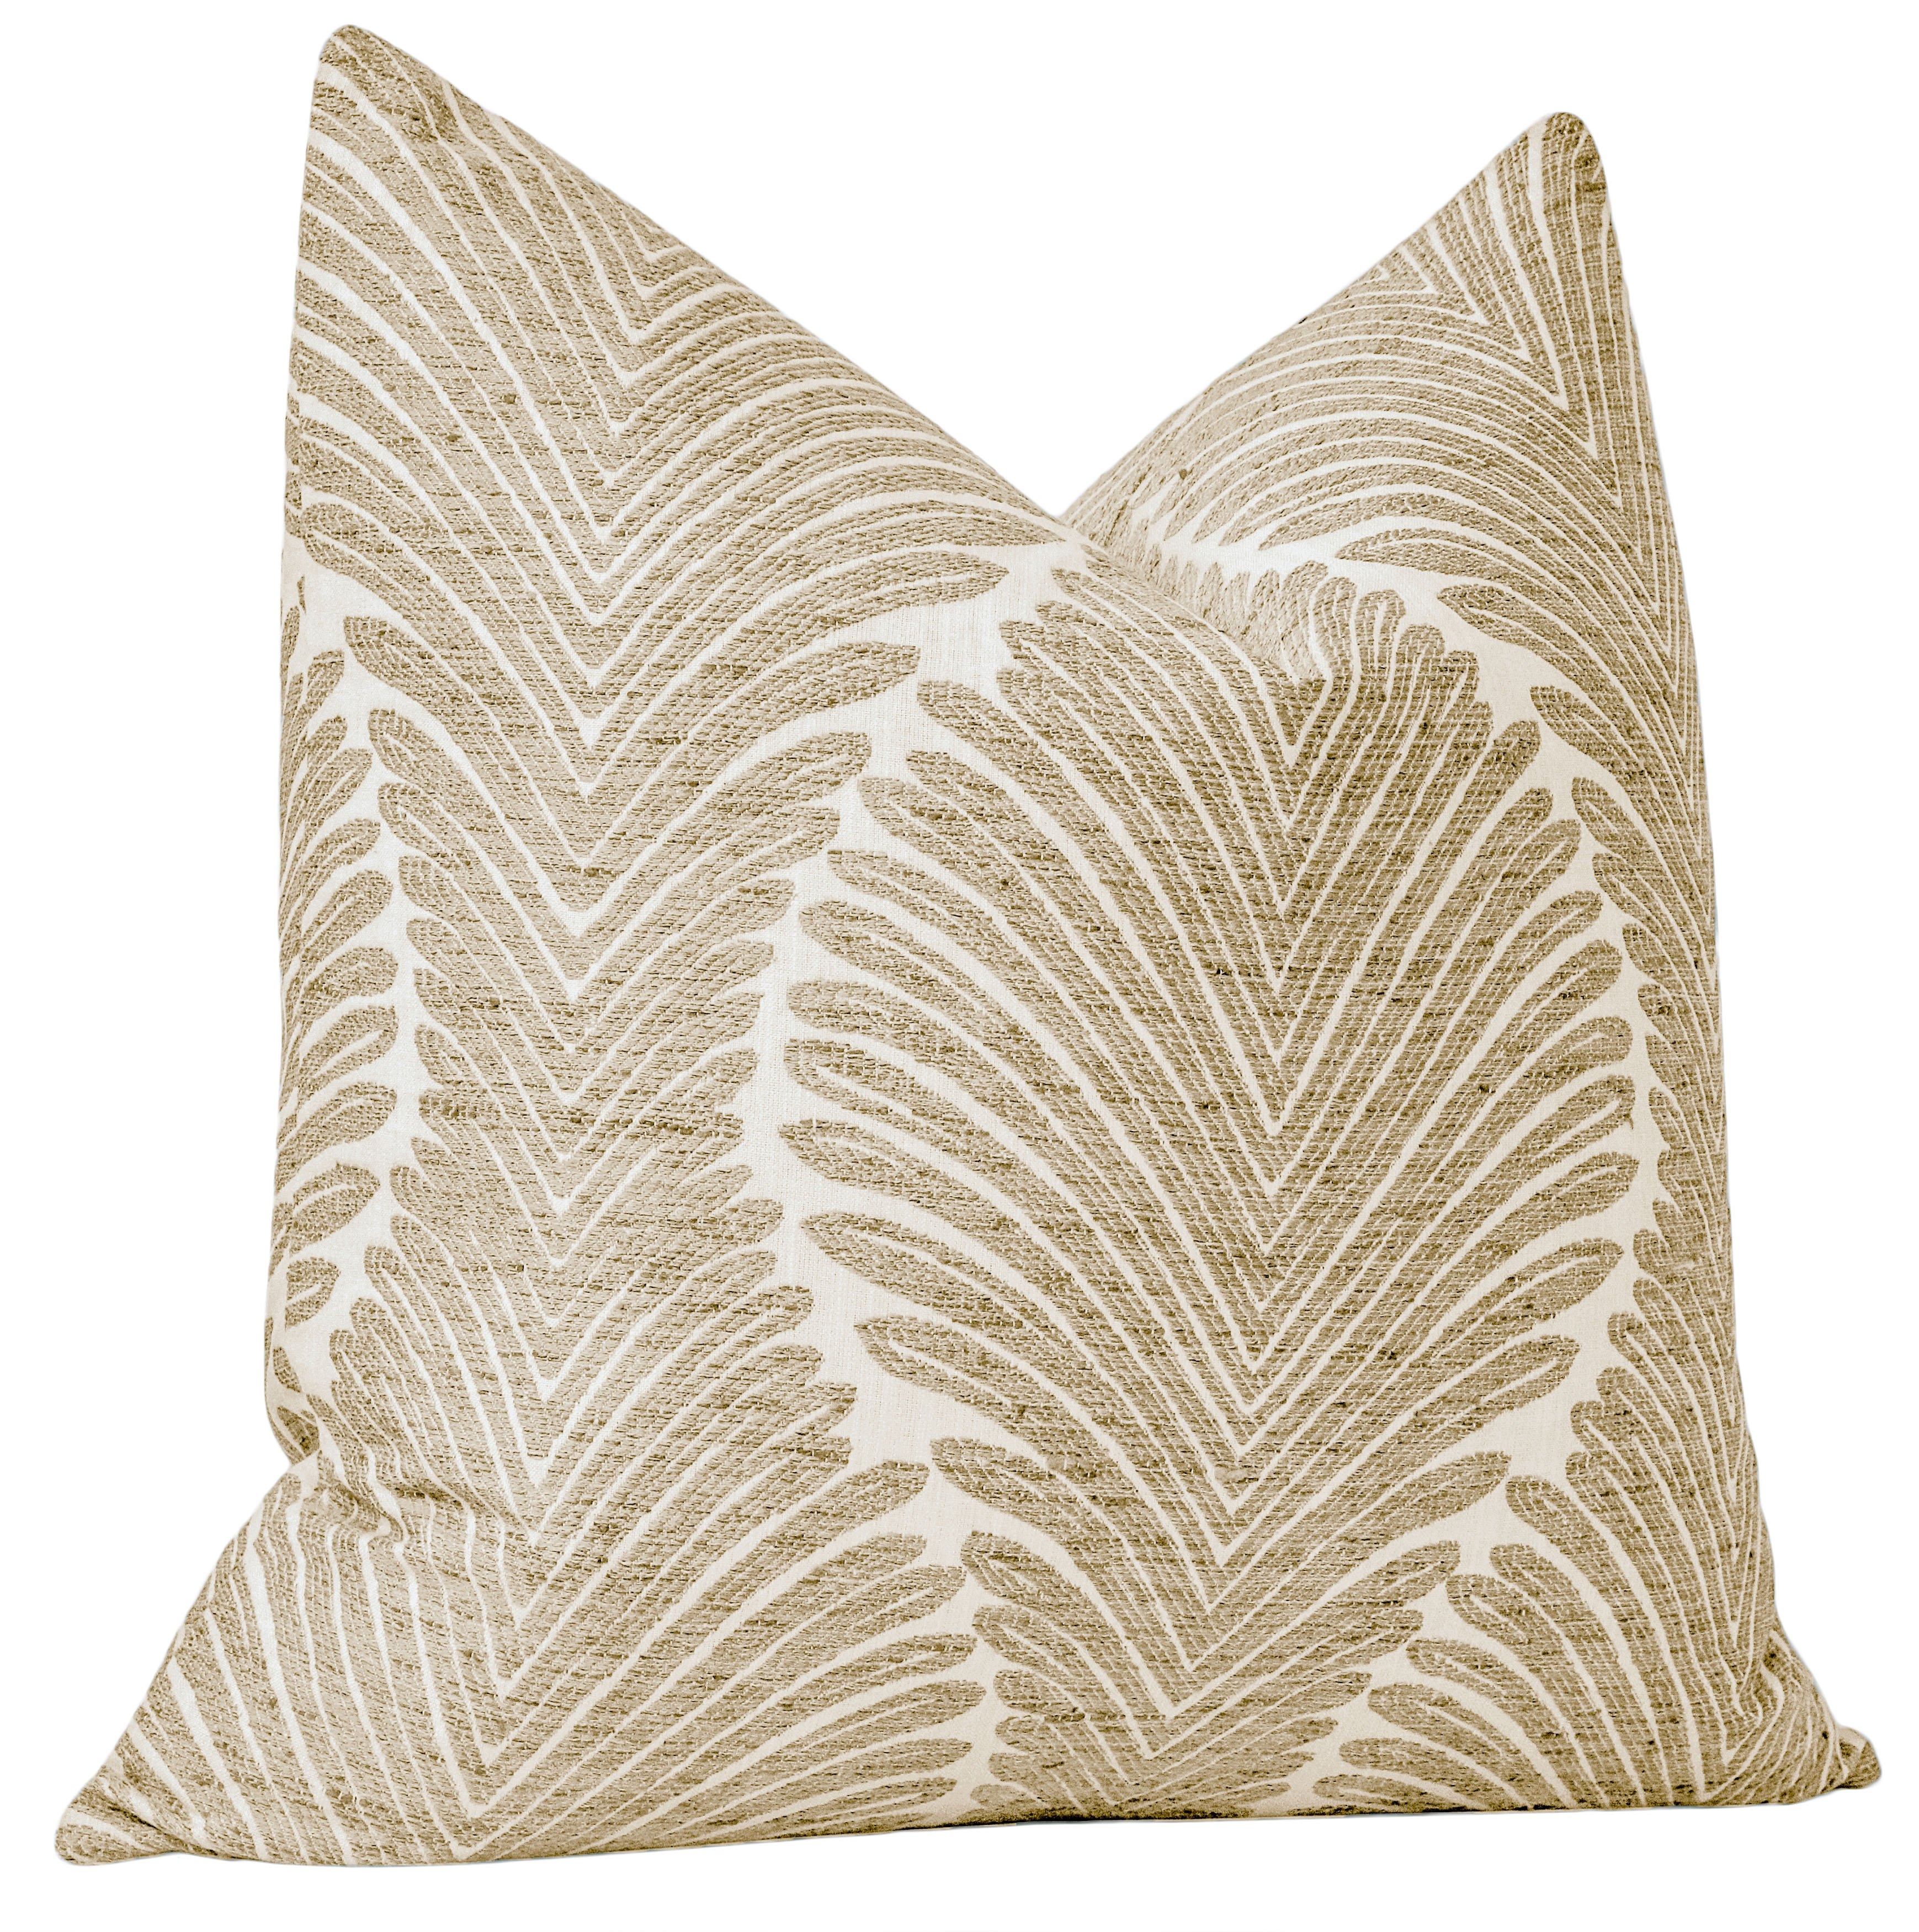 Musgrove Chenille // Natural - 18" X 18" - Image 1